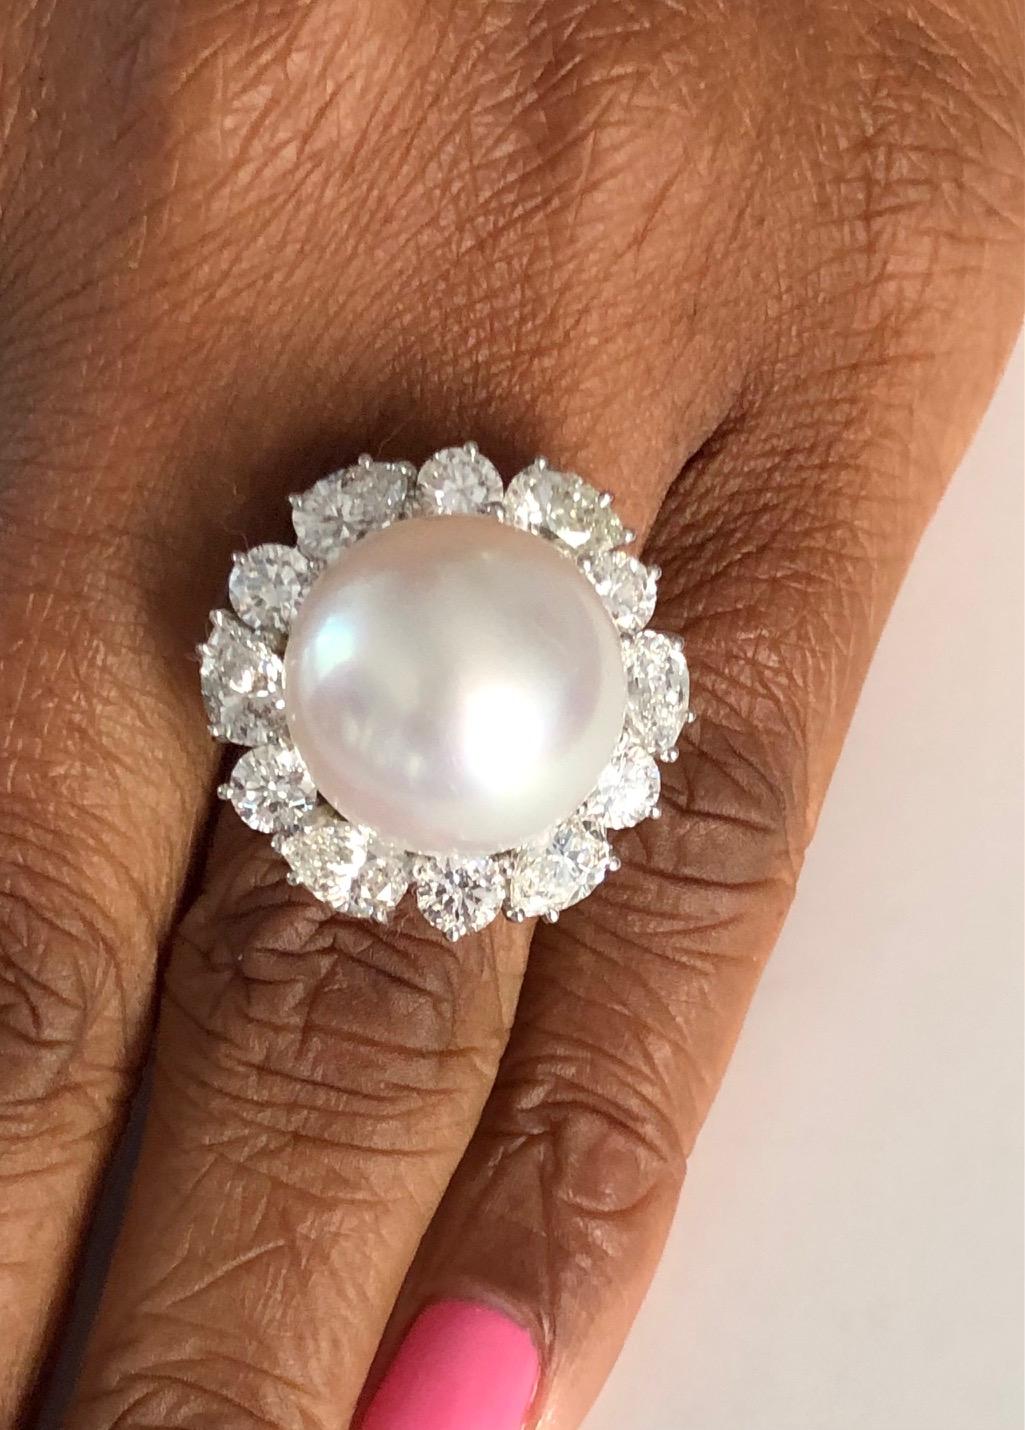 This fantastic quality handmade Ring is a very rare piece, made with the 12 Diamonds 4.79 carats of the highest quality and an excellent quality Round South Sea Pearl 16.2mm.

We design and manufacture our jewelry in our workshop, located in New